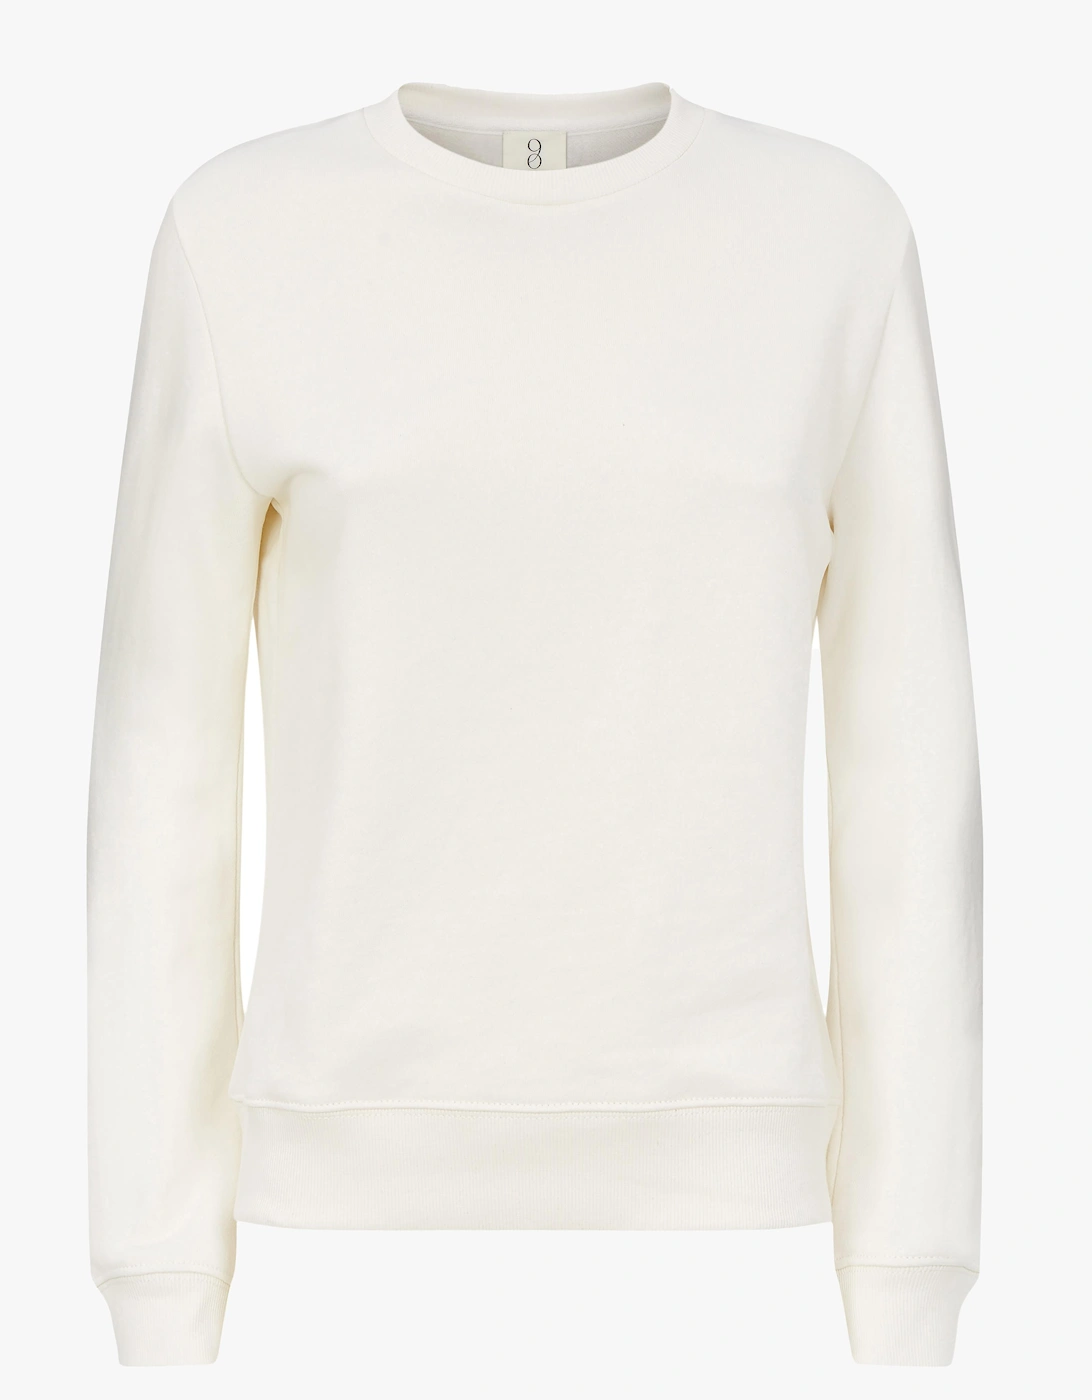 Kendall Sweatshirt in Off White, 2 of 1